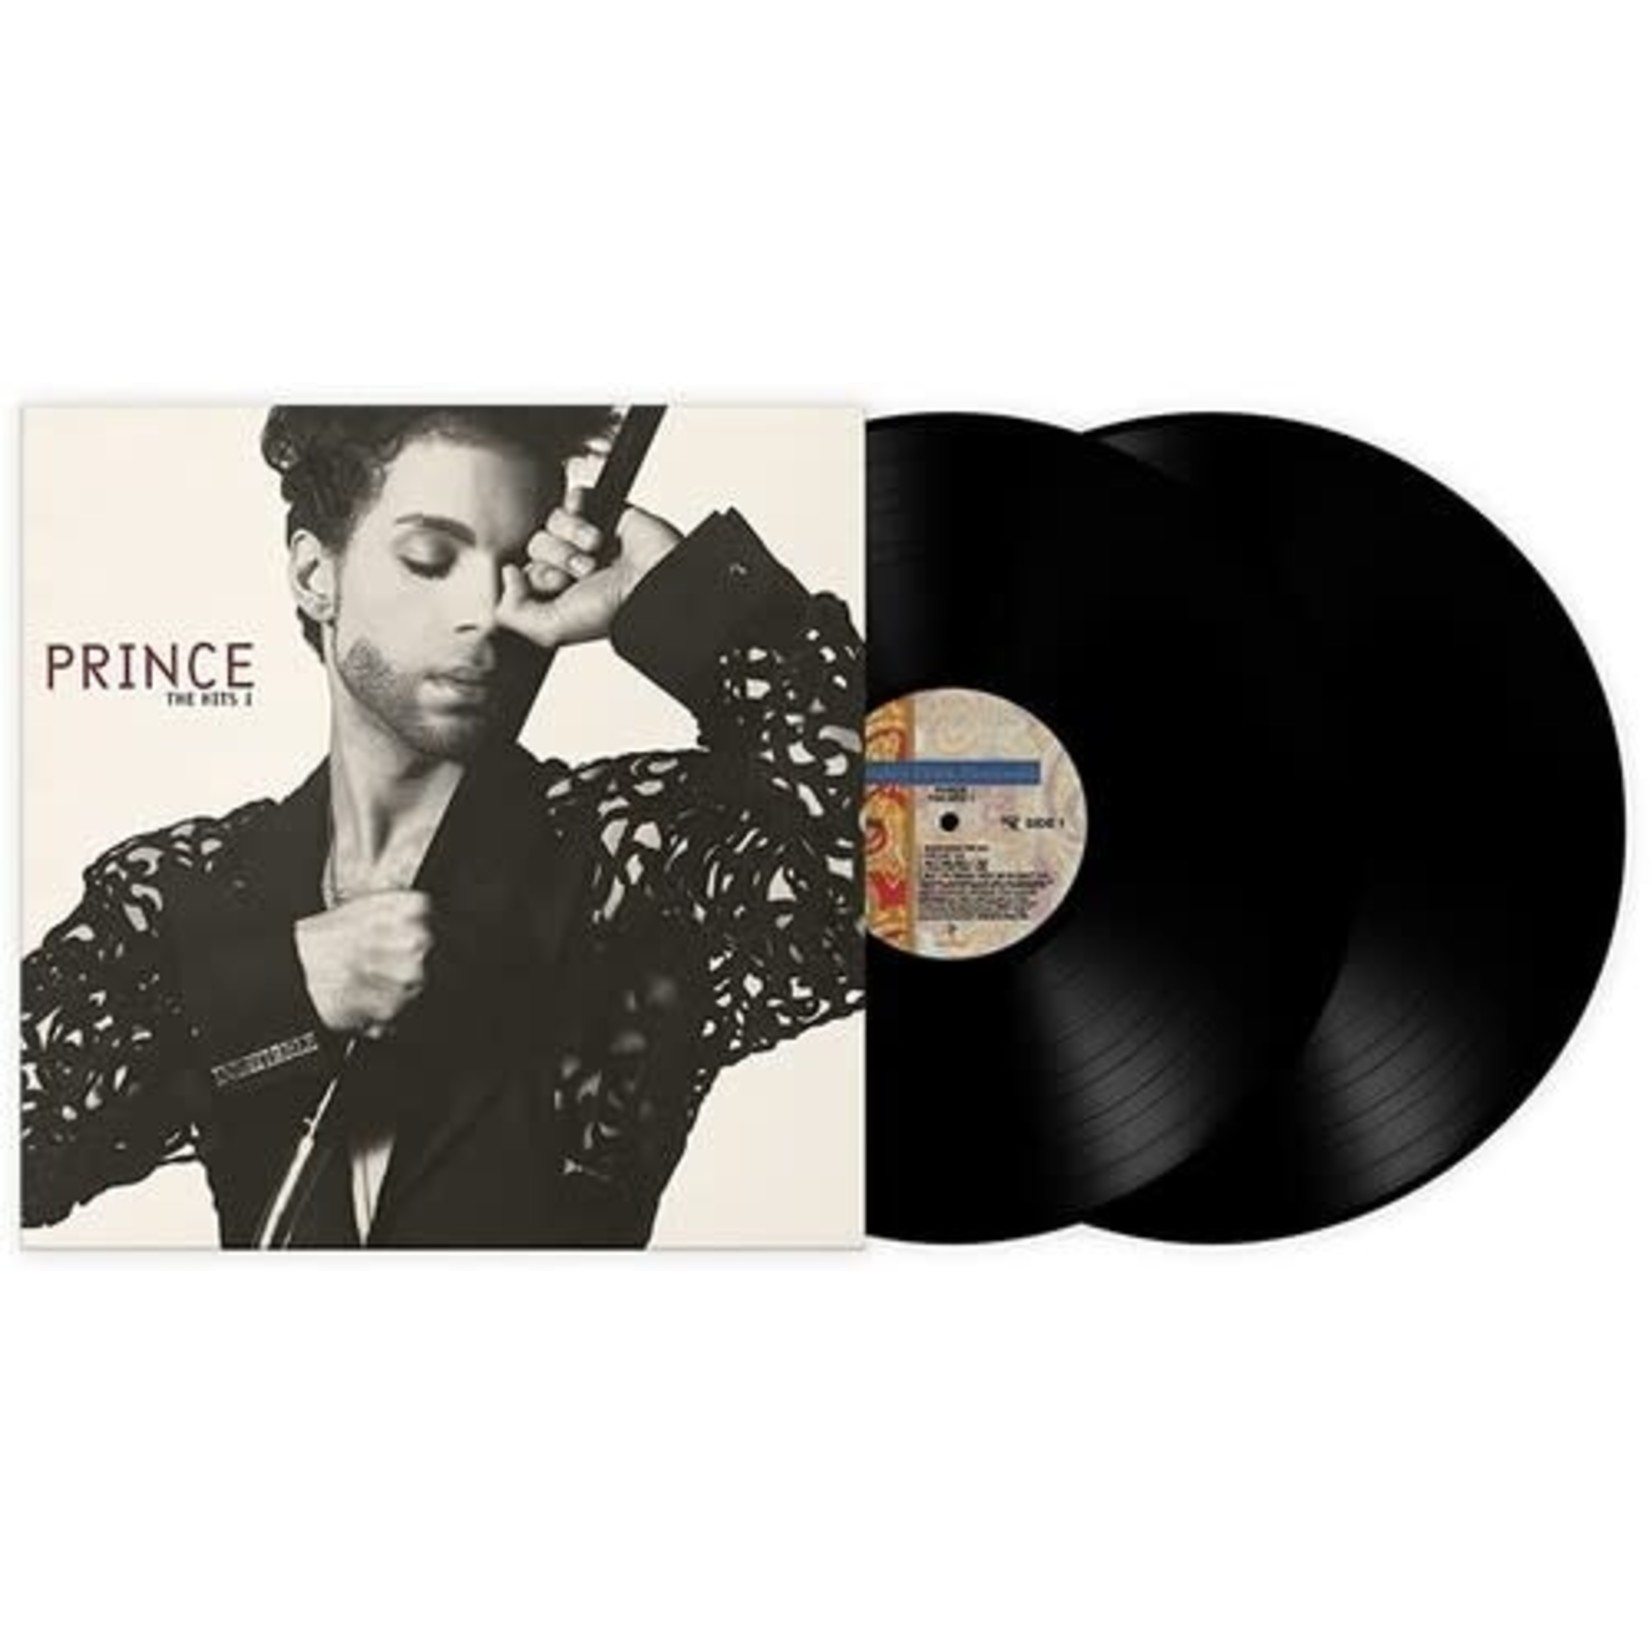 Prince - The Hits 1 [2LP]